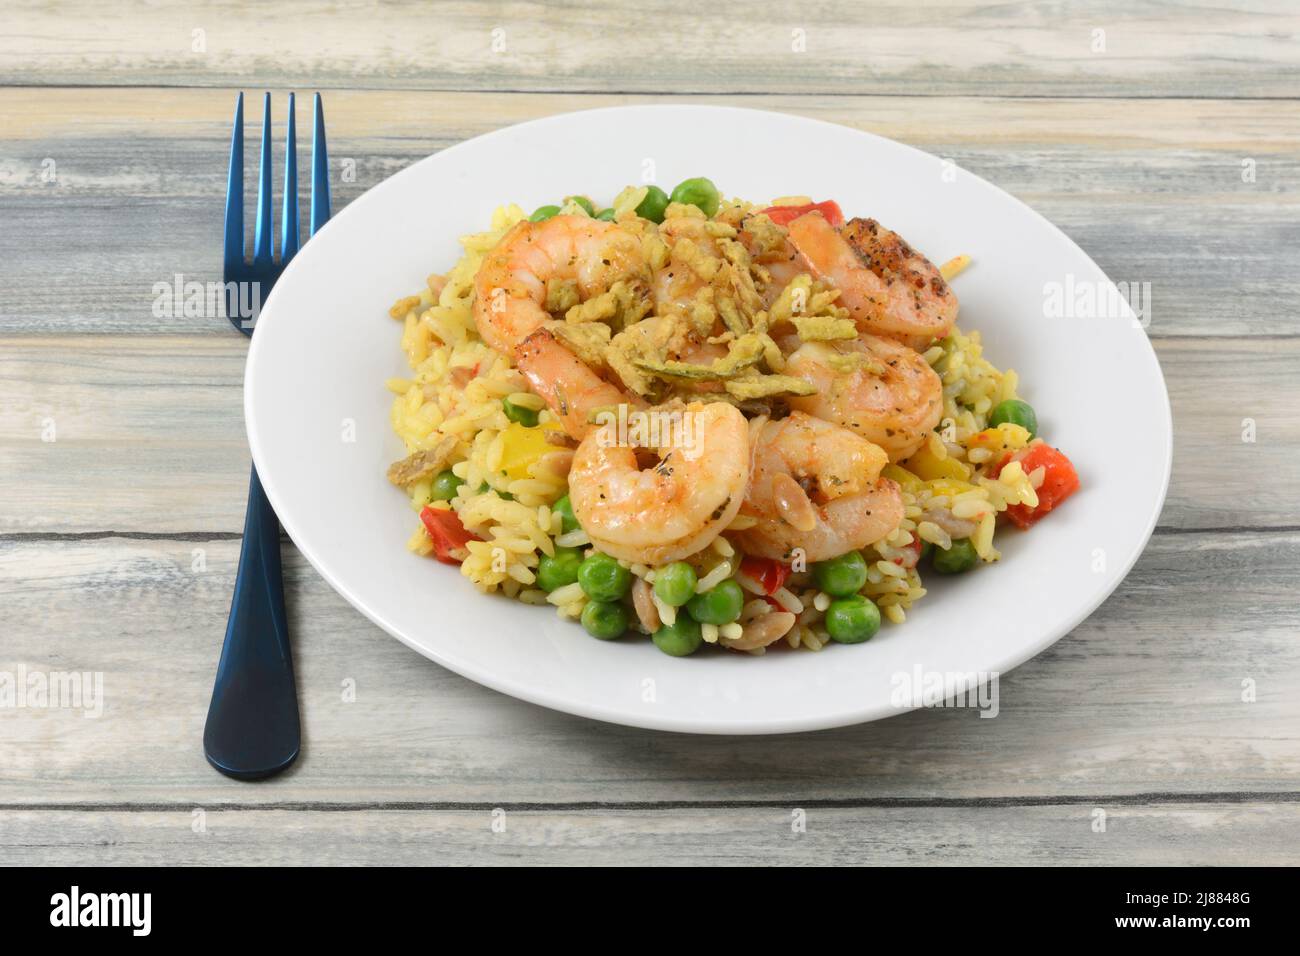 Shrimp with vegetables and white wild rice on white plate with blue fork Stock Photo